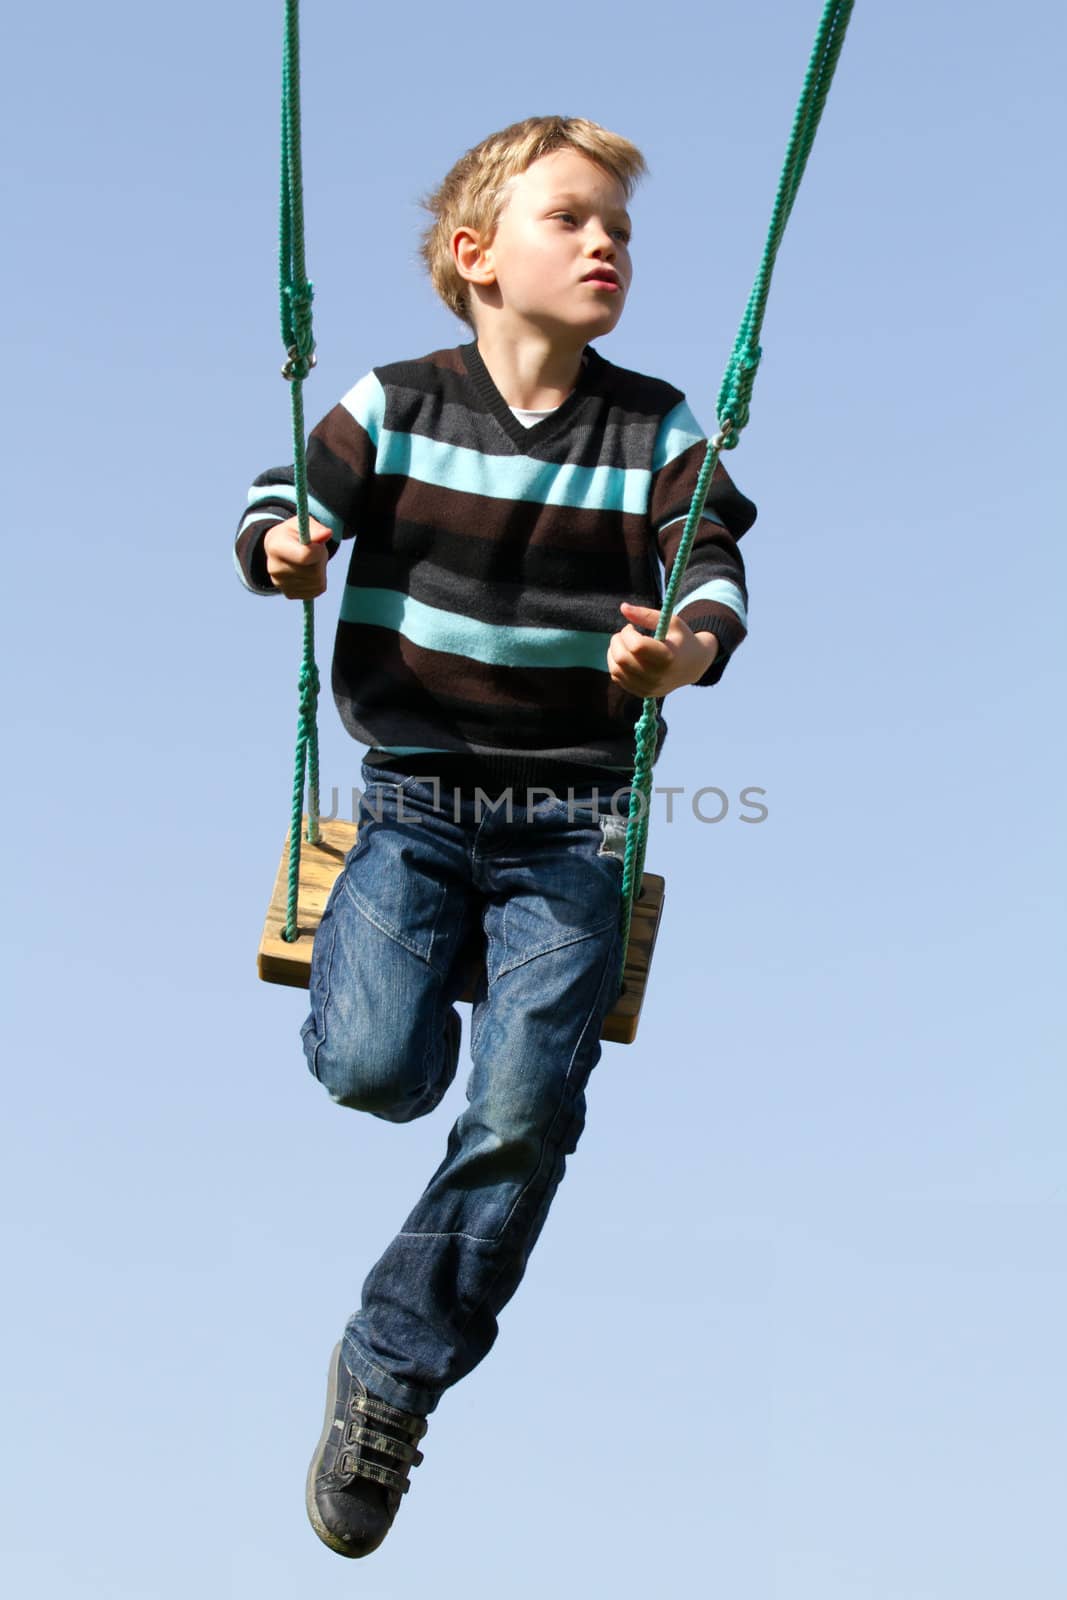 Happy child on a swing